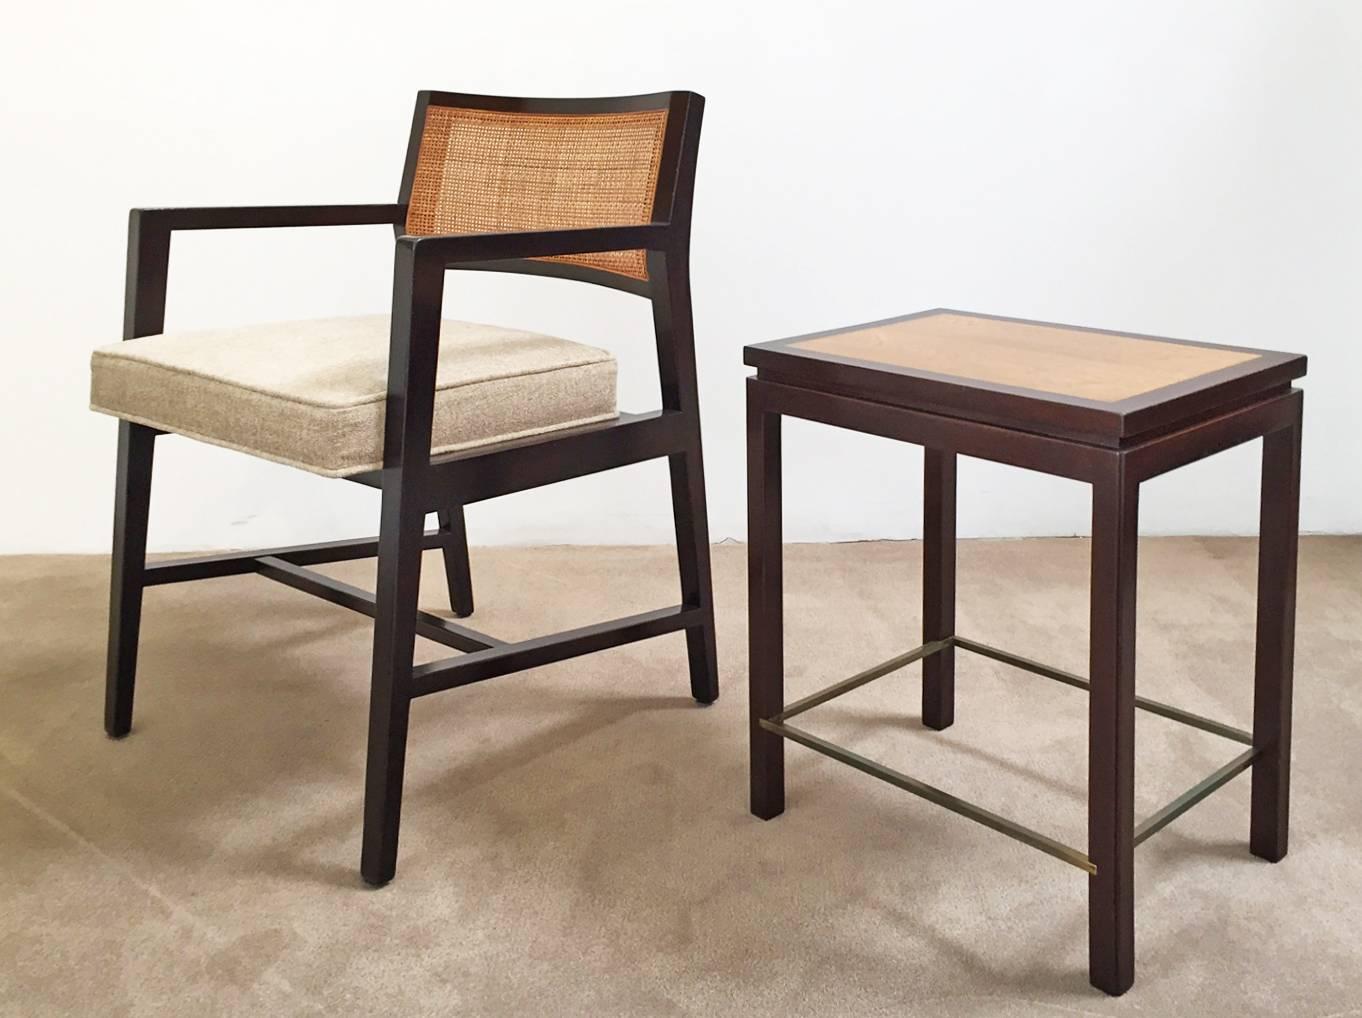 Pair of matching tables designed by Edward Wormley for Dunbar Furniture.
Contrasting wood with brass stretchers. Price is for the pair.

Complementary delivery in the Los Angeles / Beverly Hills area and Pasadena area. Pick up is also an option.
